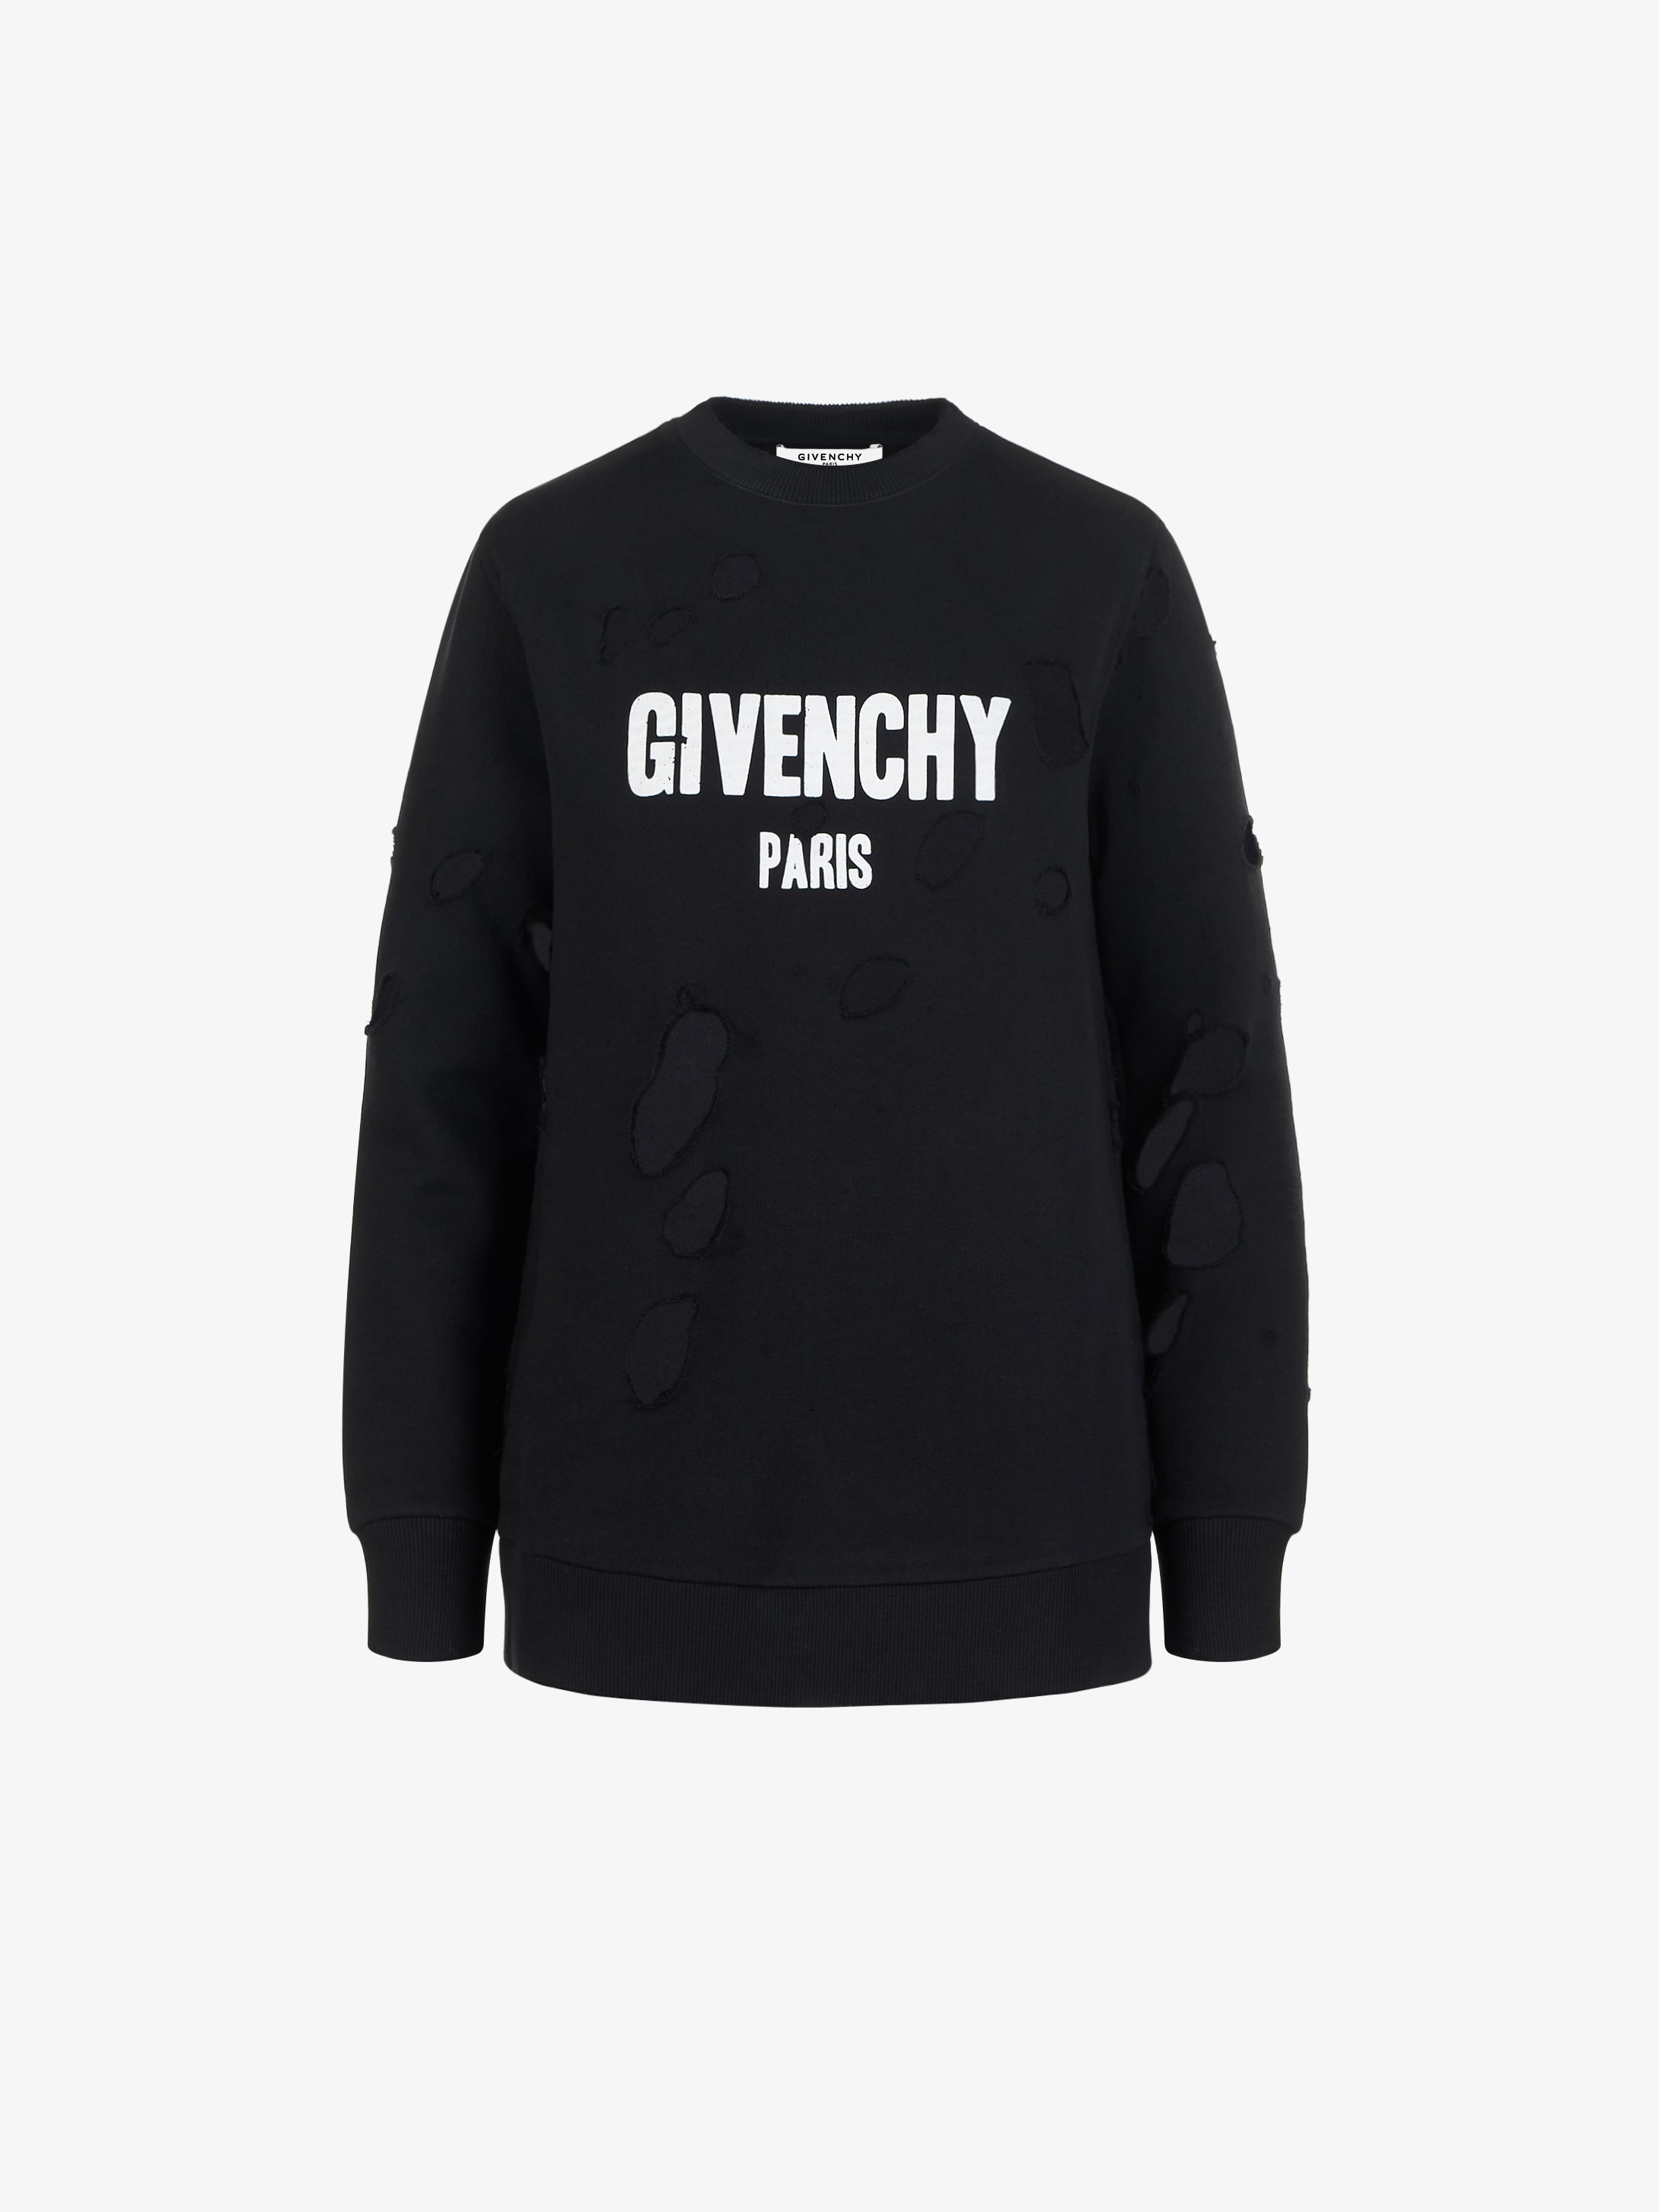 distressed givenchy sweater